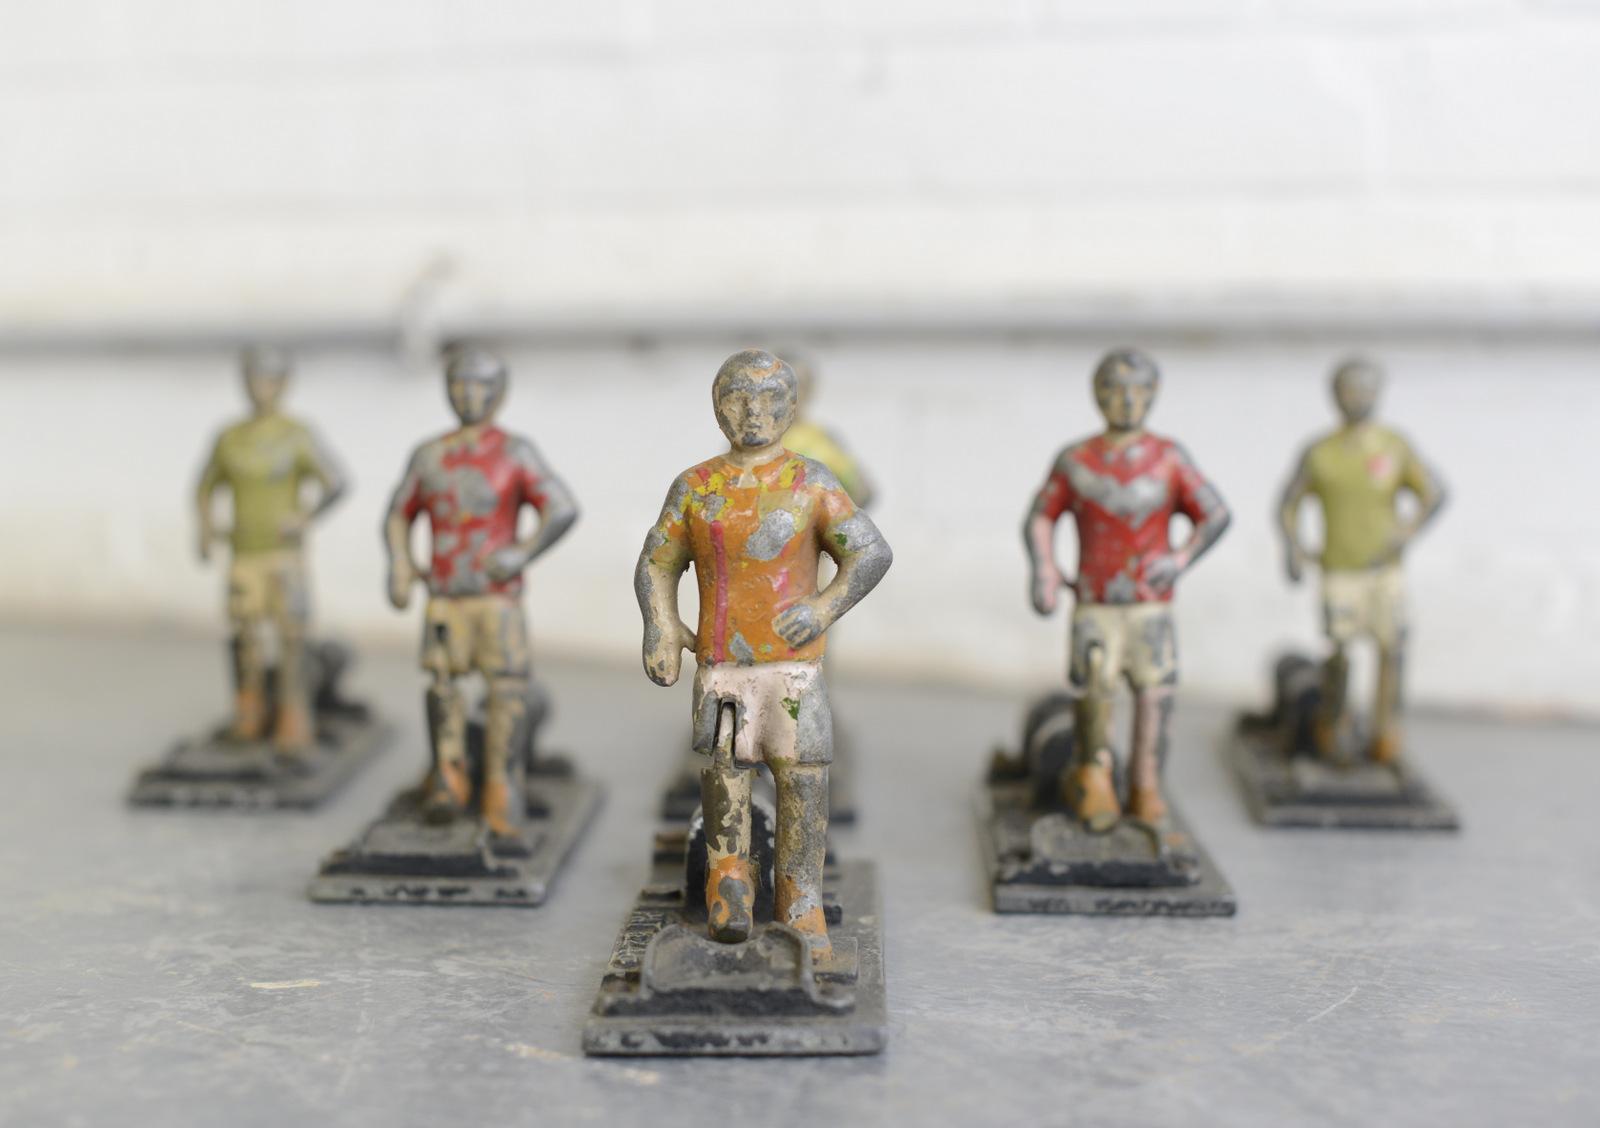 Early 20th century cast iron amusement arcade footballers

- Price is per piece
- Cast iron with Phosphor bronze kicking leg
- Original paint
- Originally used in the amusement arcade under Blackpool tower, we purchased them from the family who